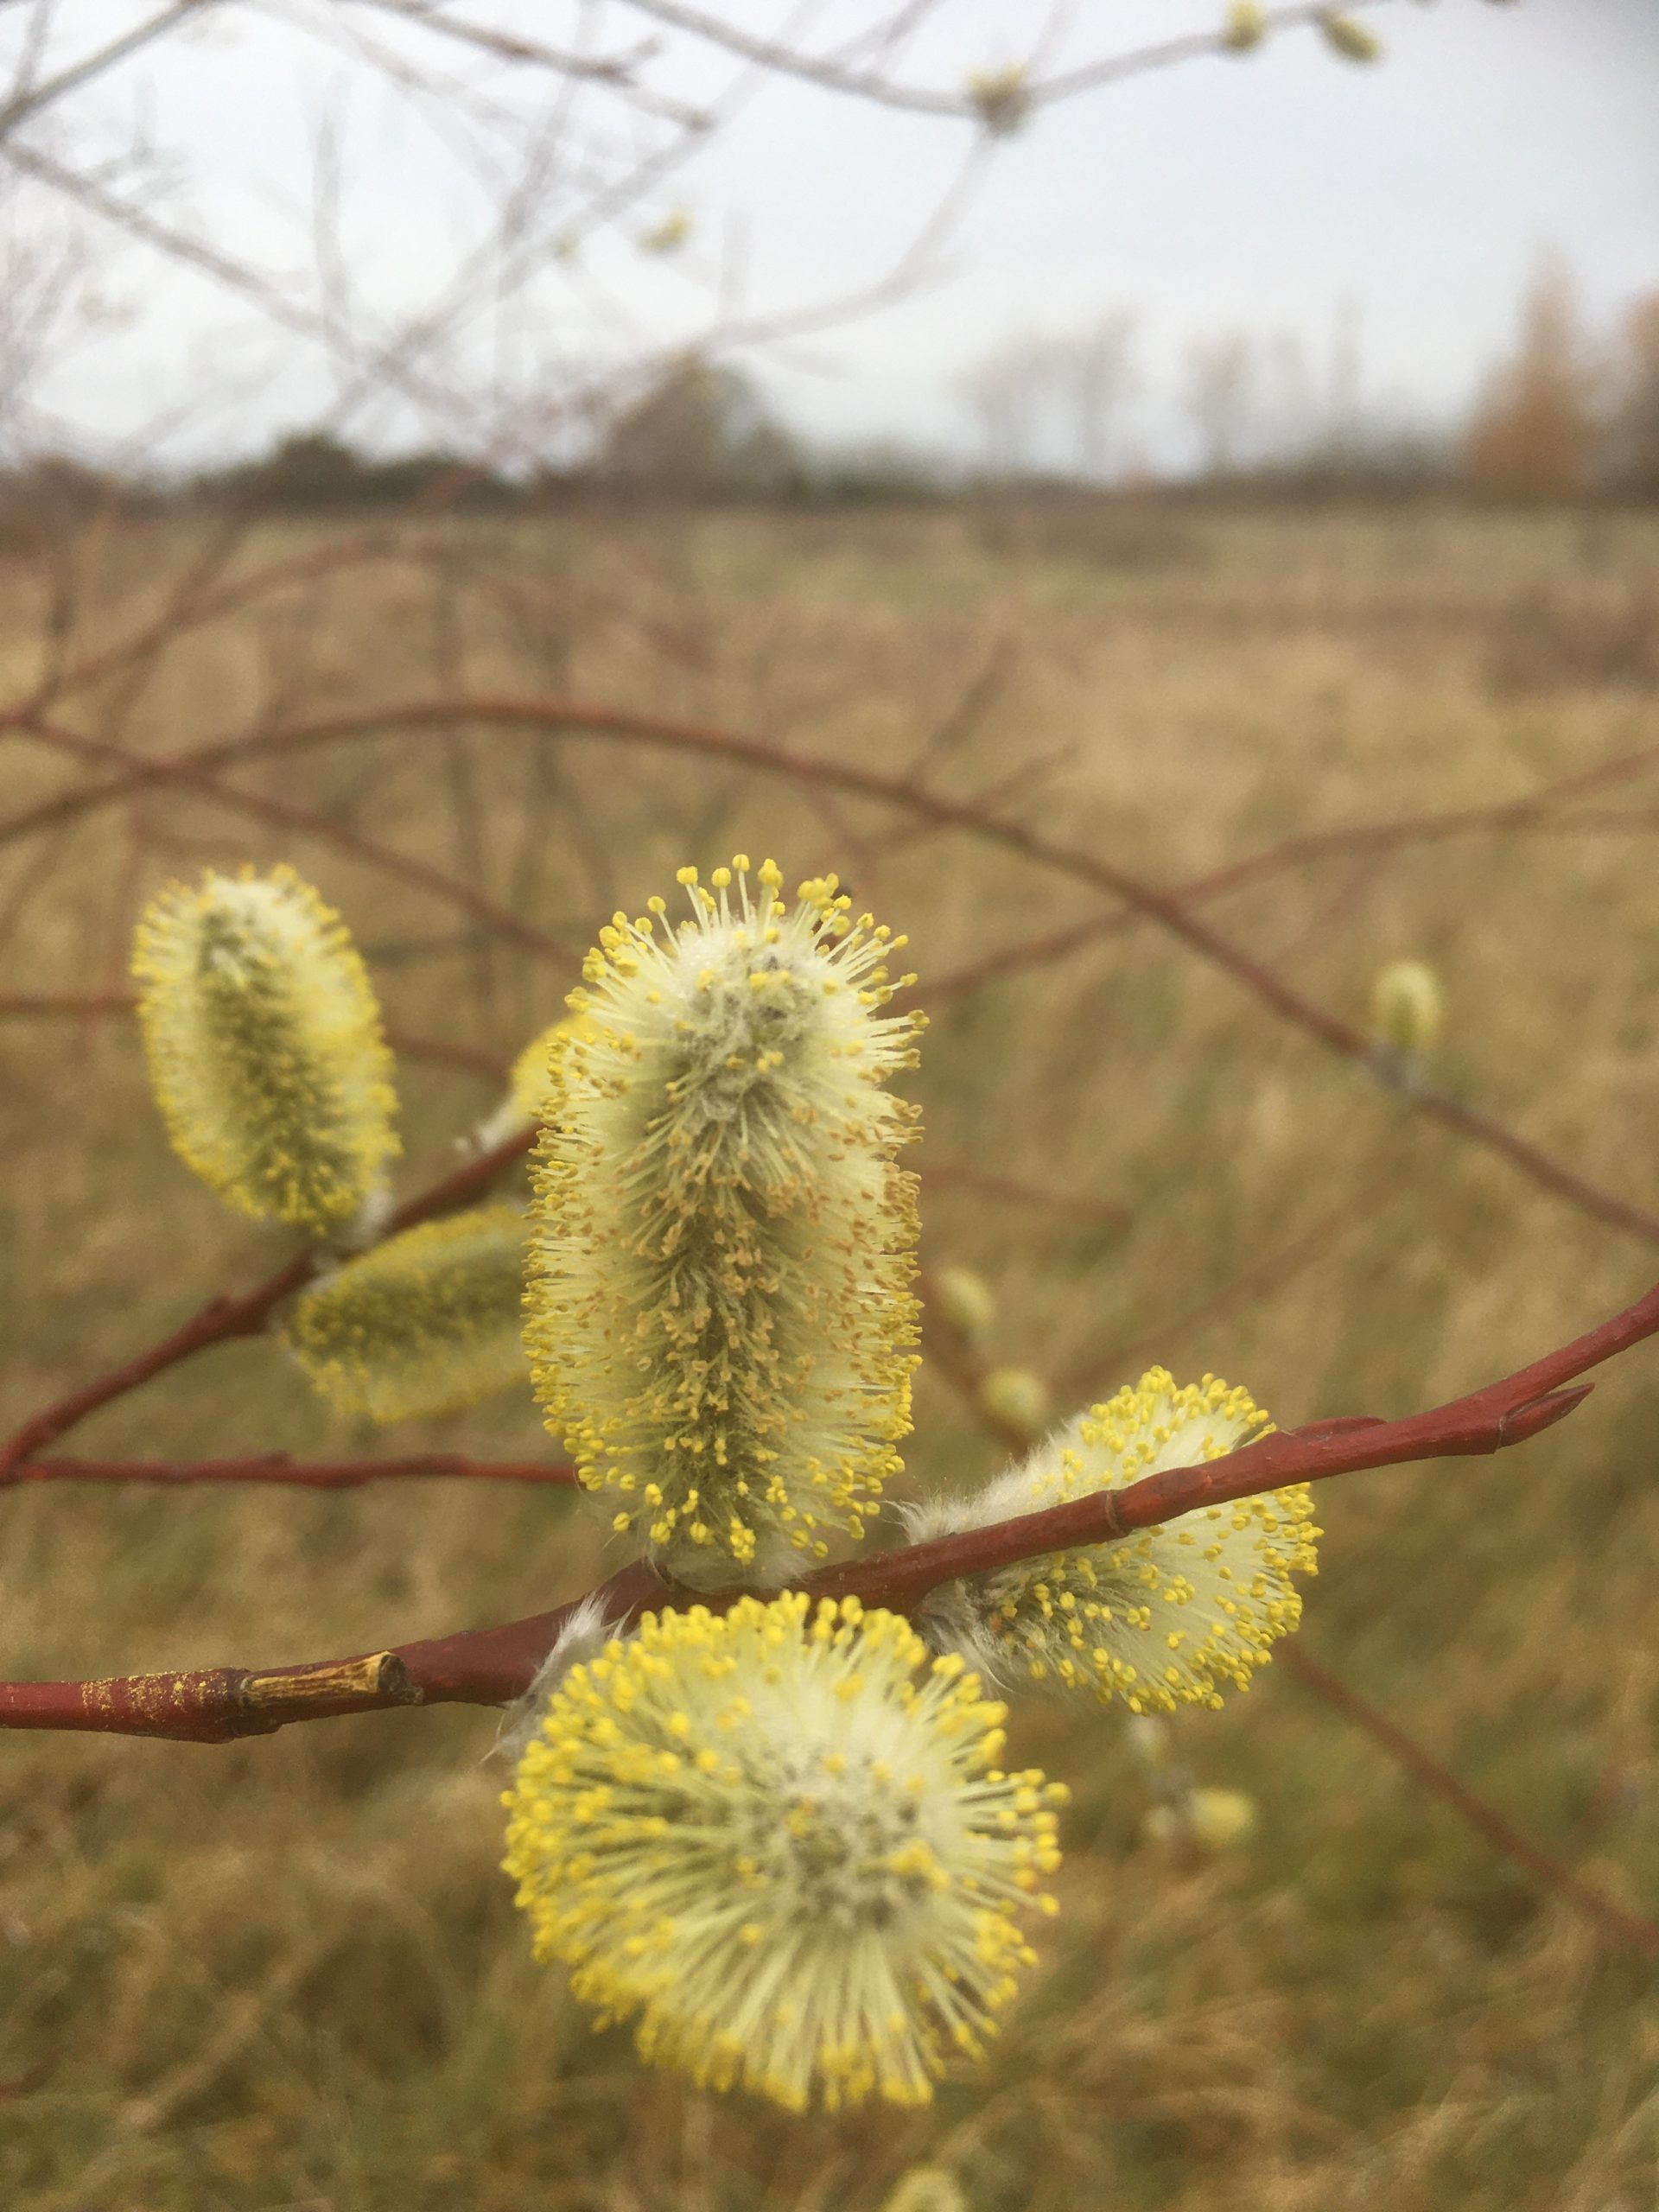 Salix Daphnoides Aglaia catkins at Willows Nursery. A good sauce of pollen for early bees.